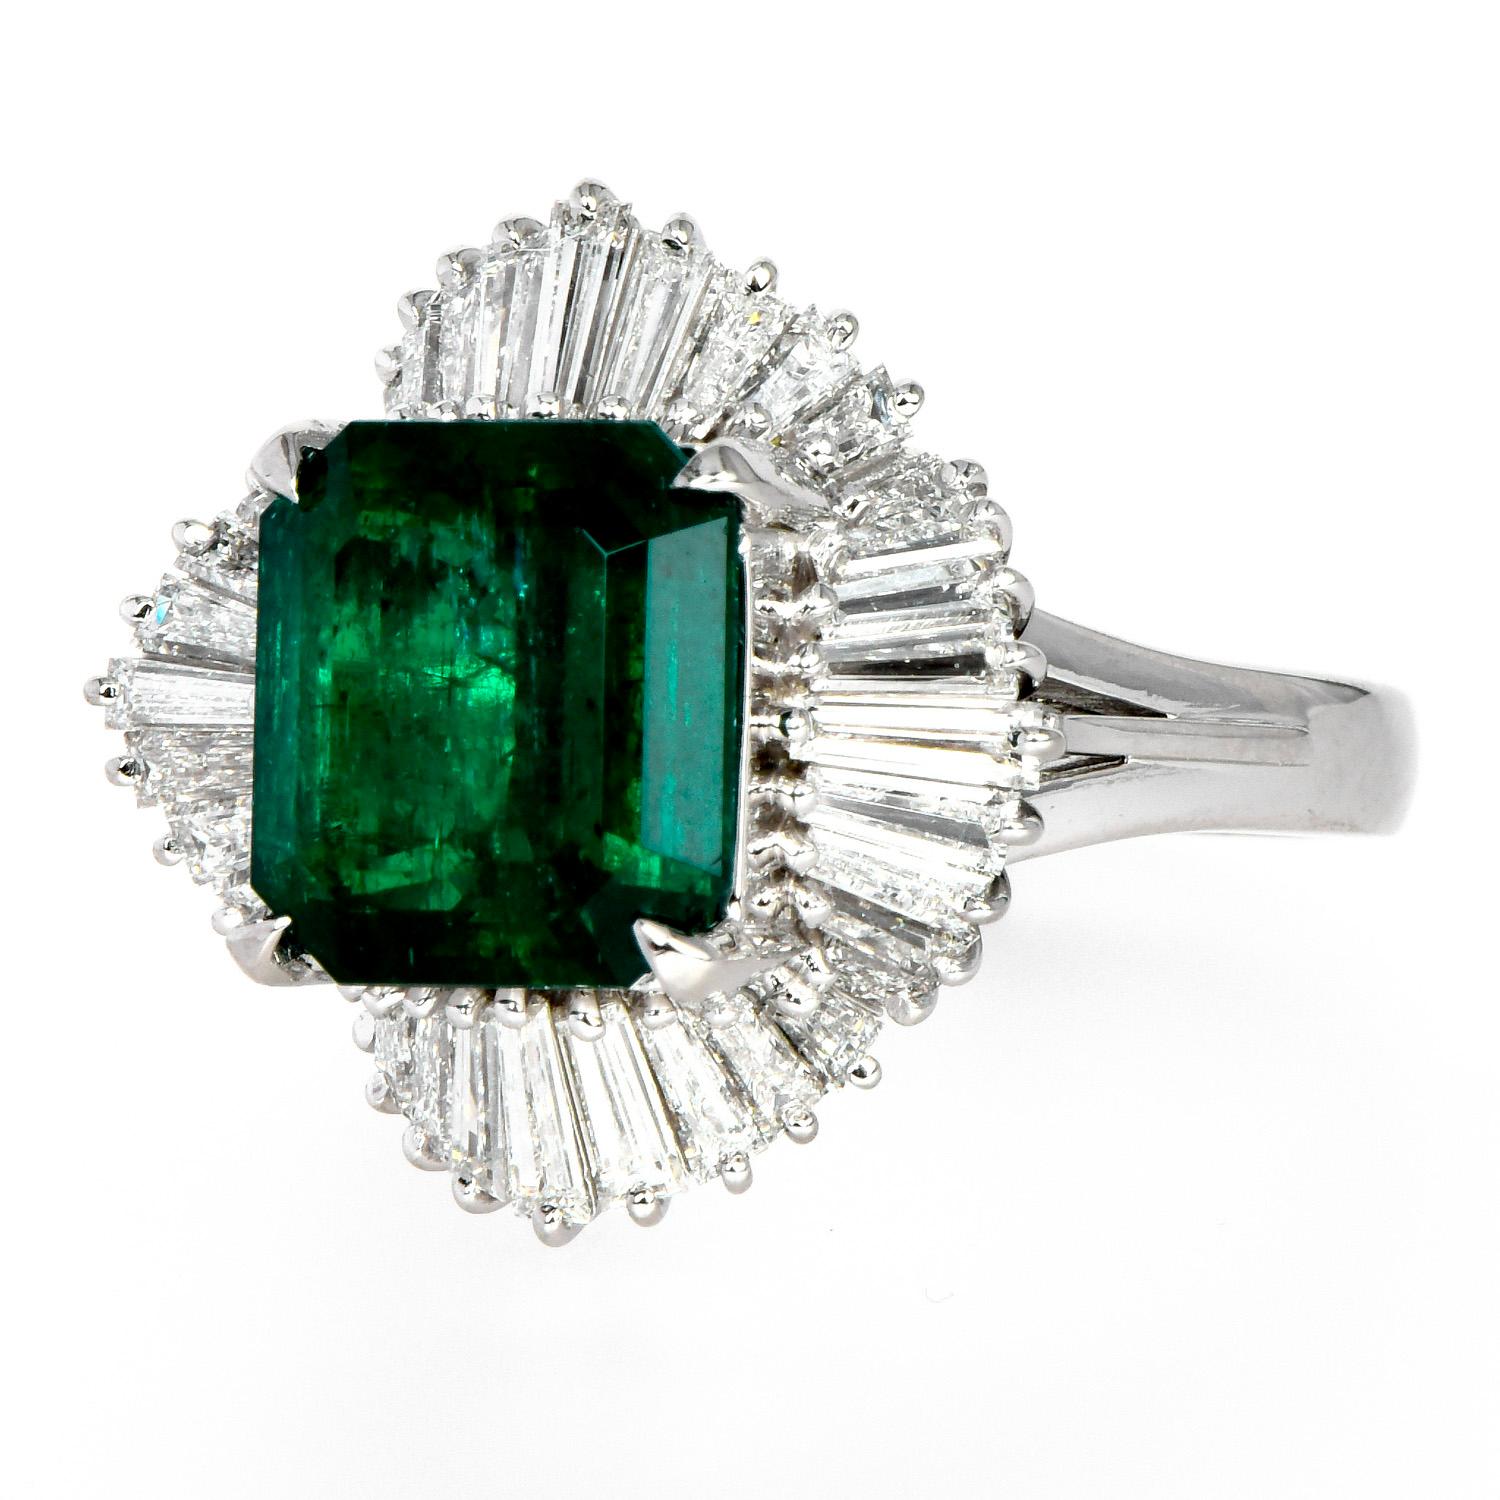 Exquisite ballerina style cocktail ring, with a sparkly ballerina & old mine Emerald.

Crafted in solid Platinum, the center is adorned by a GRS Certified vividly green color-saturated, old mine very fine Muzo Colombian emerald. Colombian